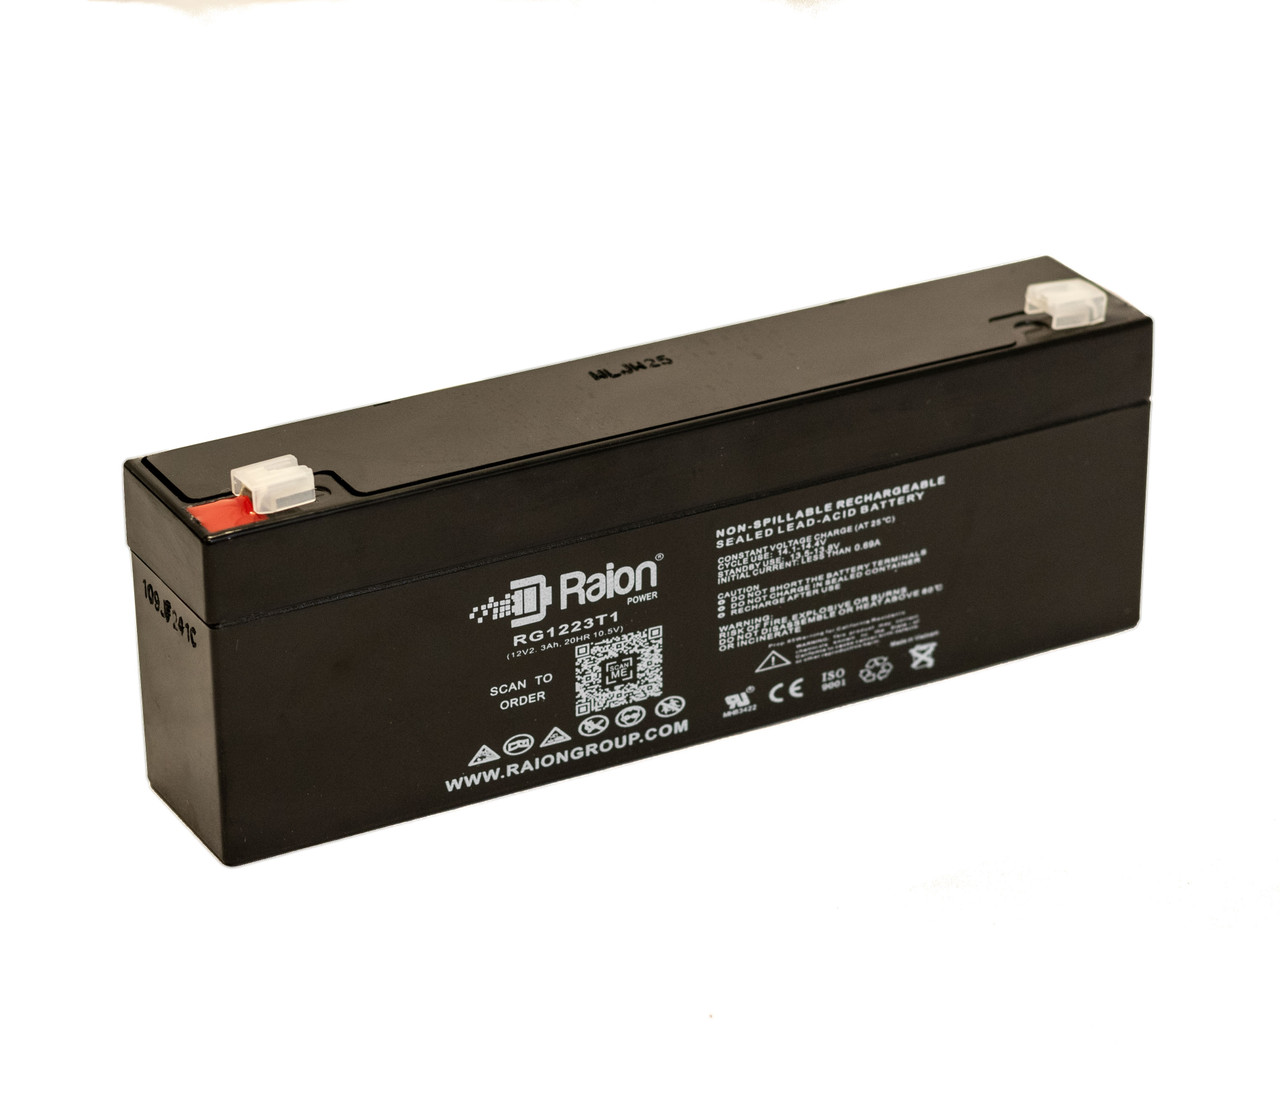 Raion Power RG1223T1 Replacement Battery for Parks Medical 922